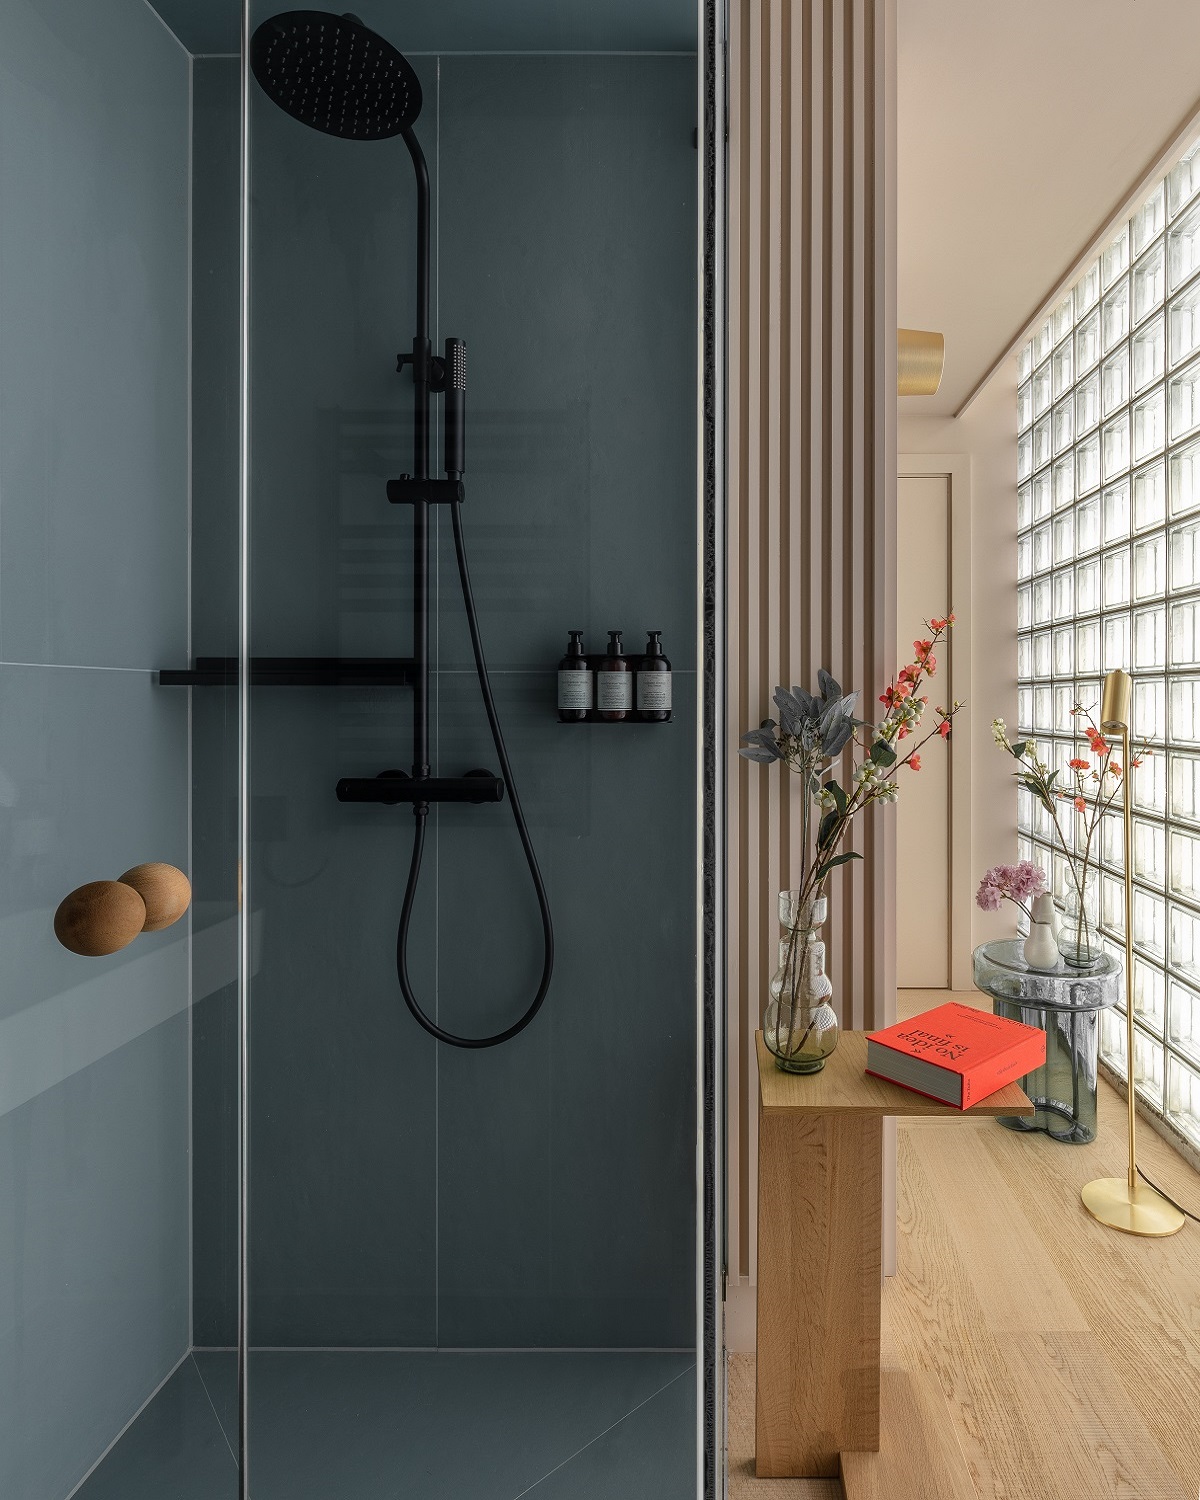 ensuite bathroom in grey with contemporary black fittings